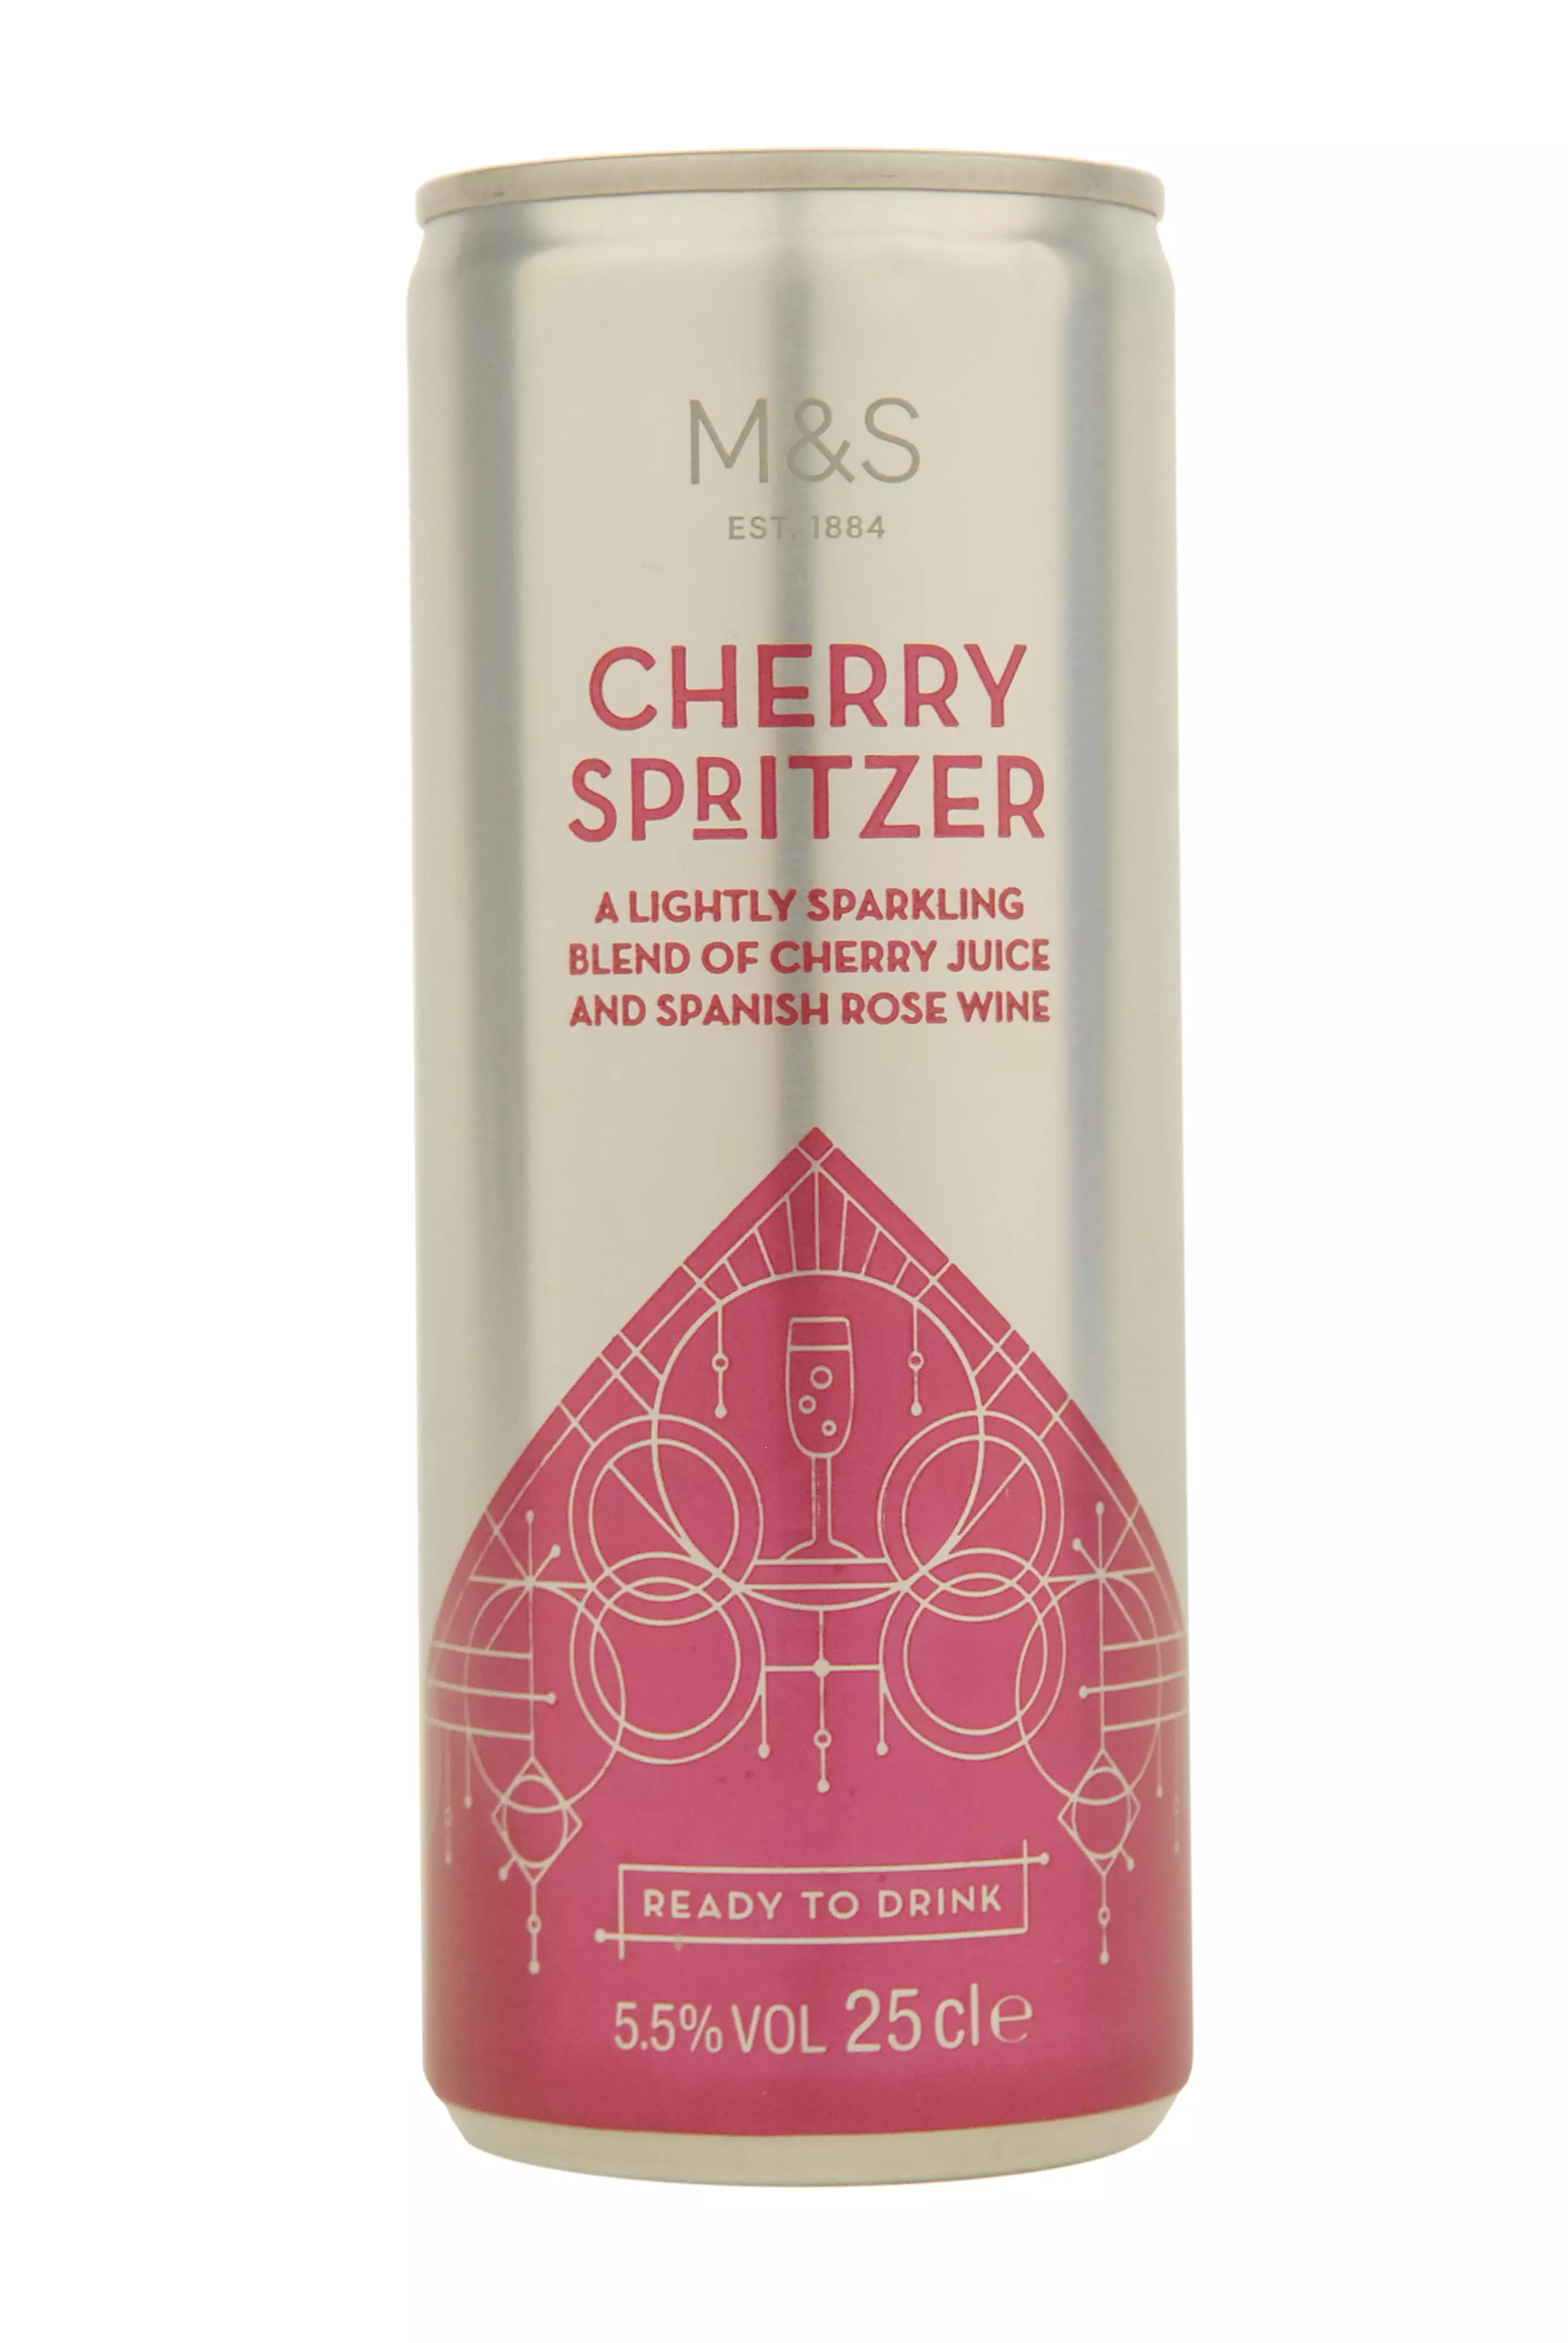 The Cherry Spritzer is "made with cherry juice and a delicate Spanish rose".